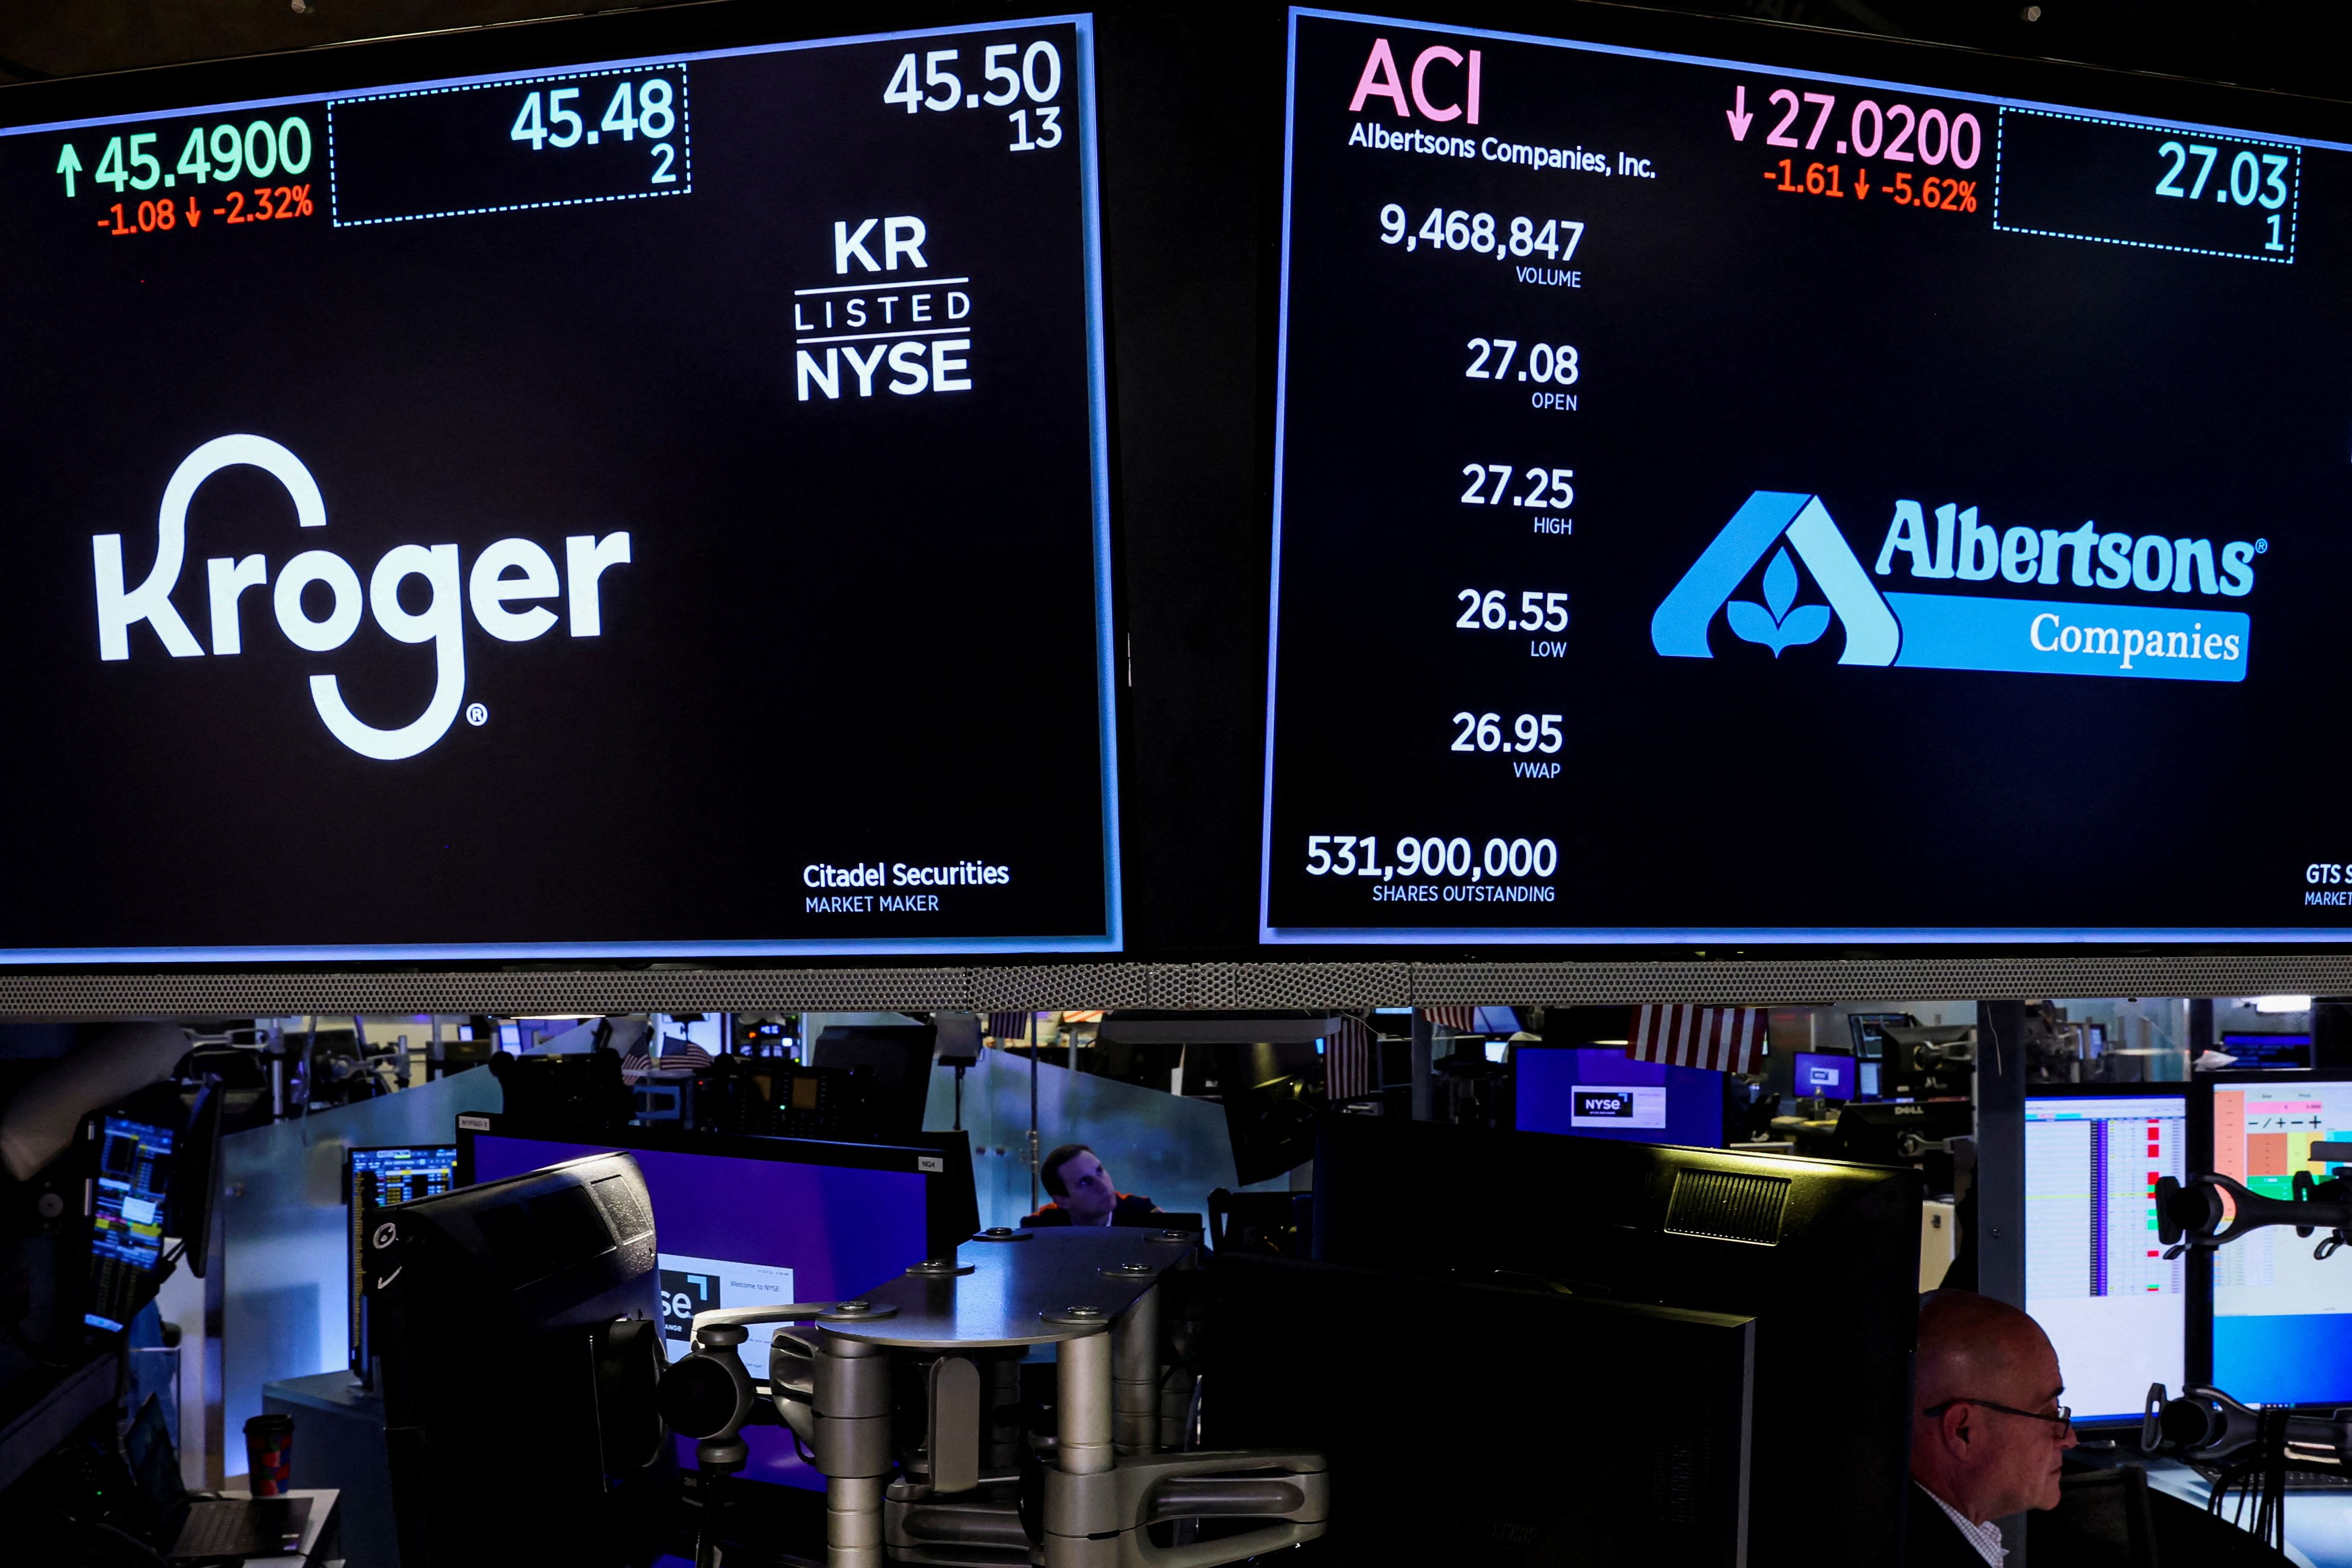 Traders work as screens display the trading information for Kroger and Albertsons on the floor of the NYSE in New York